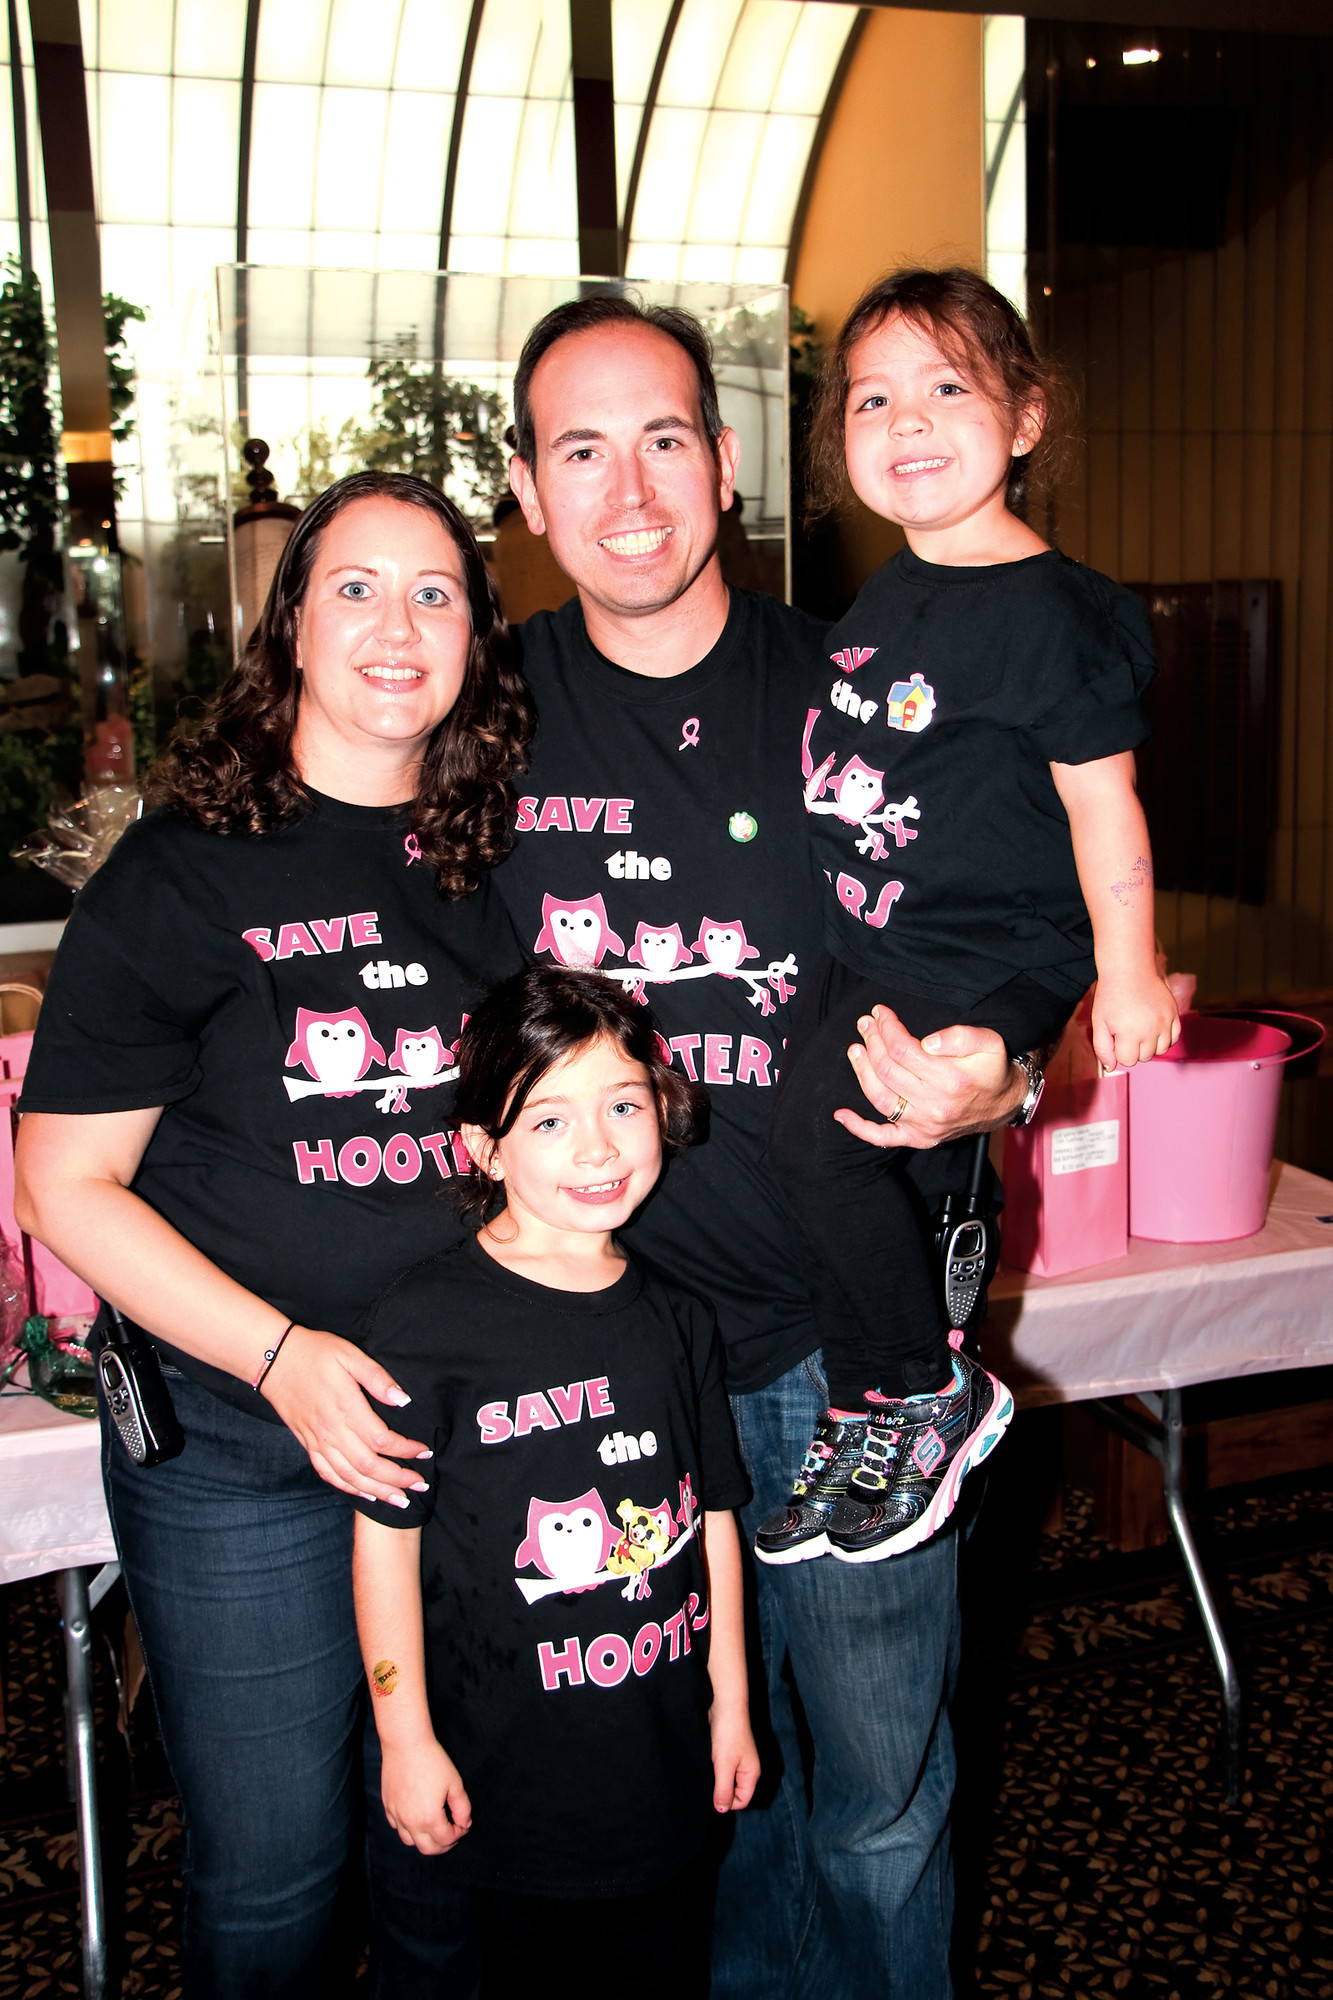 Robin Steinberger, a two-year breast cancer survivor who organized the event, with her husband Barry, and daughters, Jordyn, 7, left, and Brianna, 3.